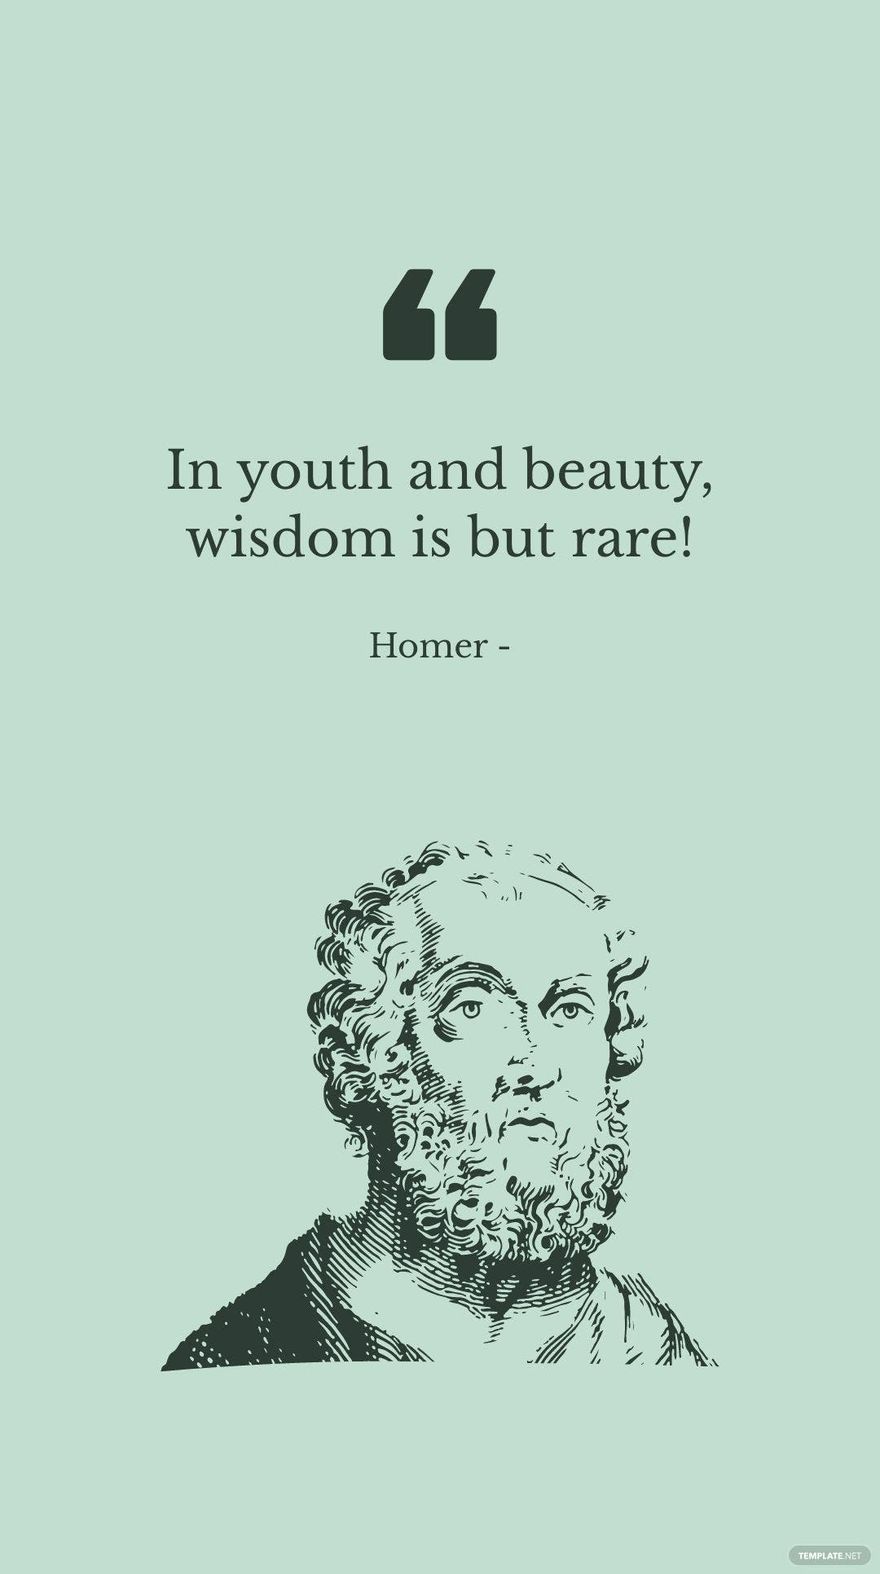 Free Homer - In youth and beauty, wisdom is but rare!